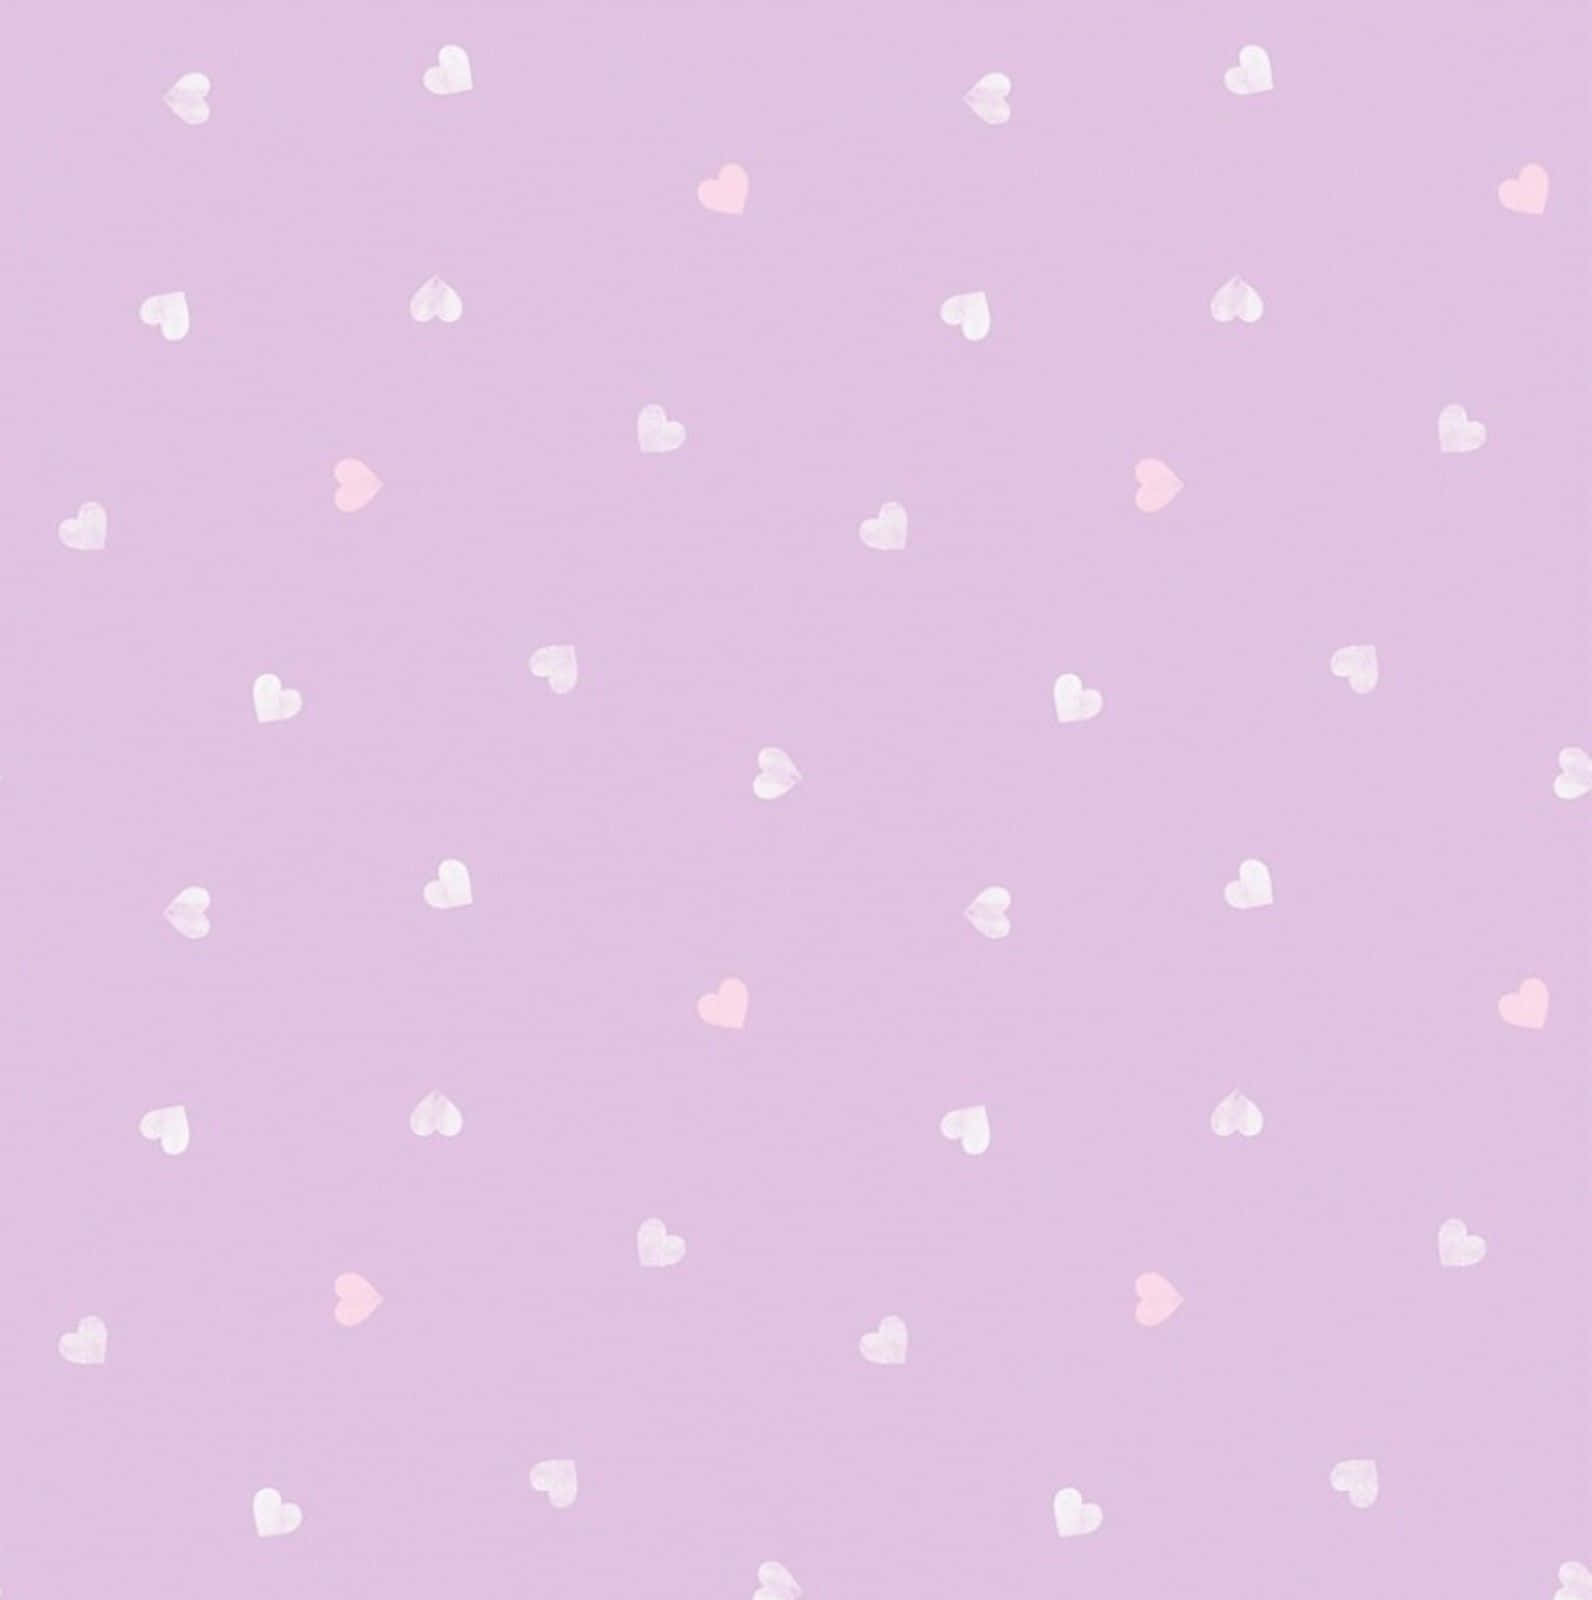 Download Pink And White Hearts Lilac Background | Wallpapers.com